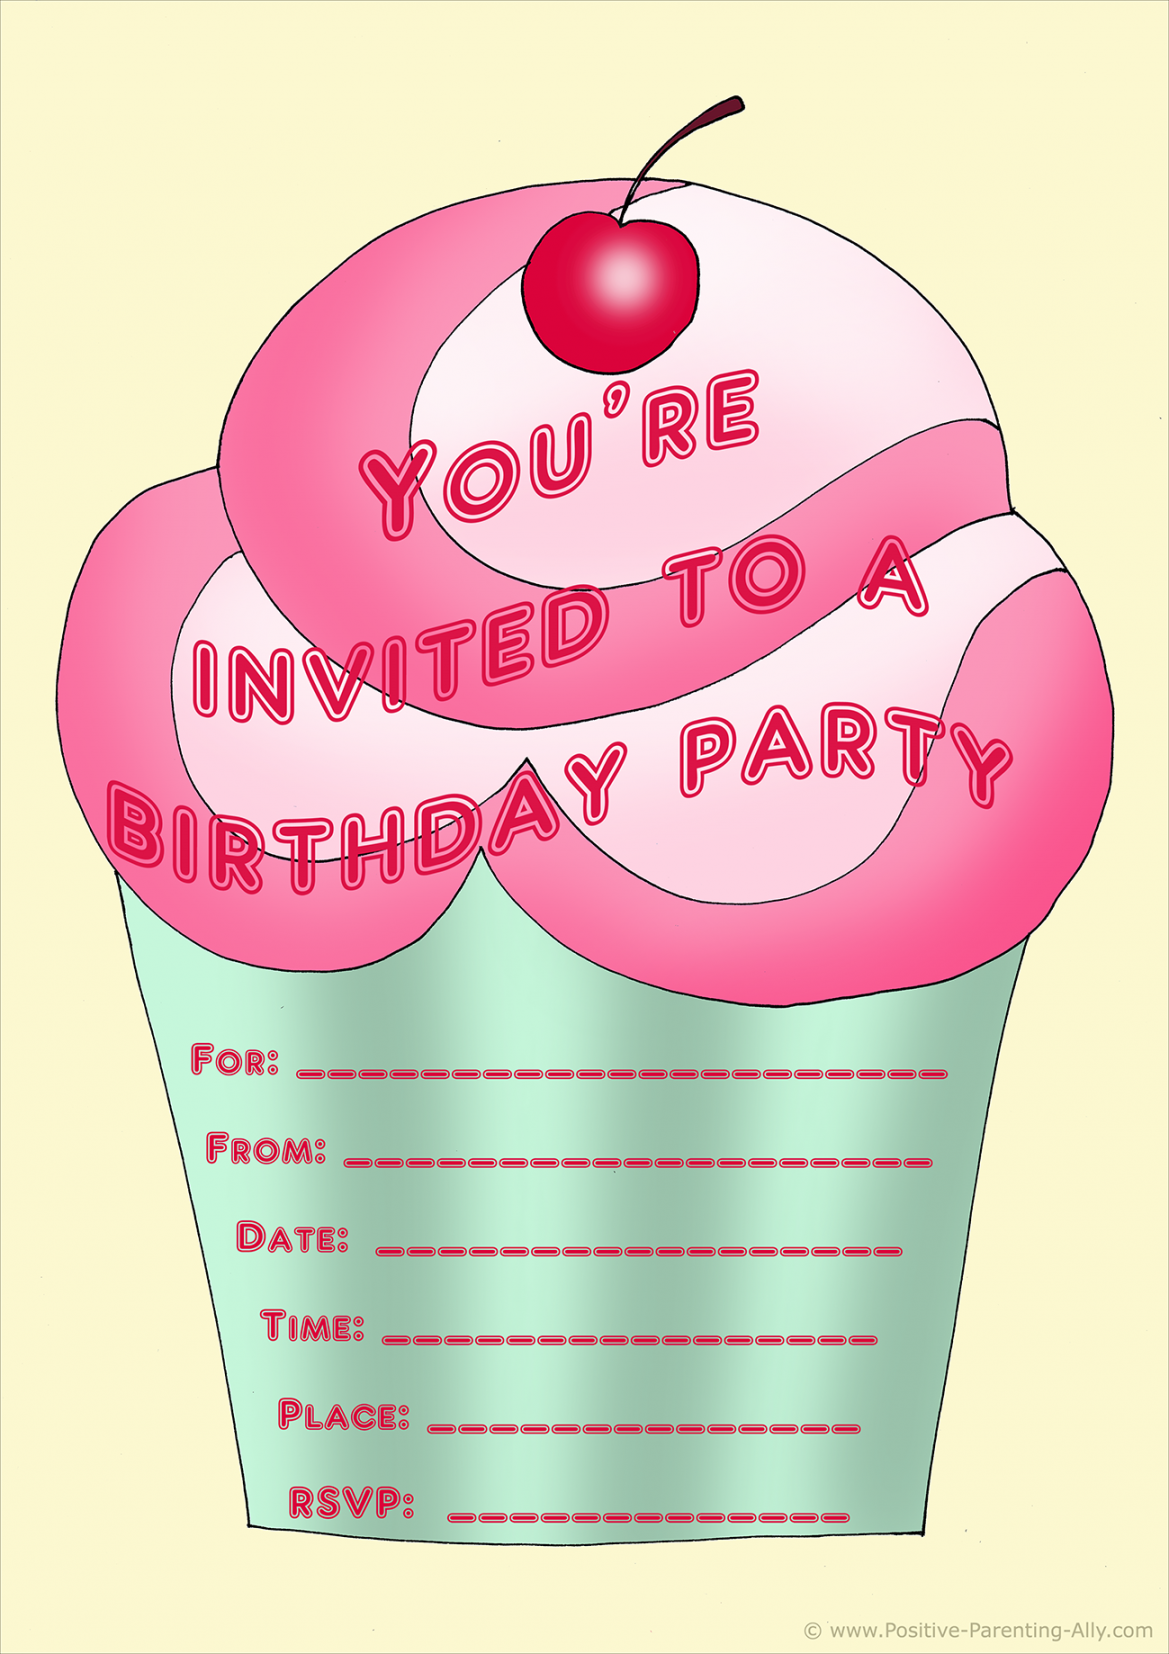 Printable Birthday Invitations Free - Printable - Free Birthday Party Invites for Kids in High Print Quality